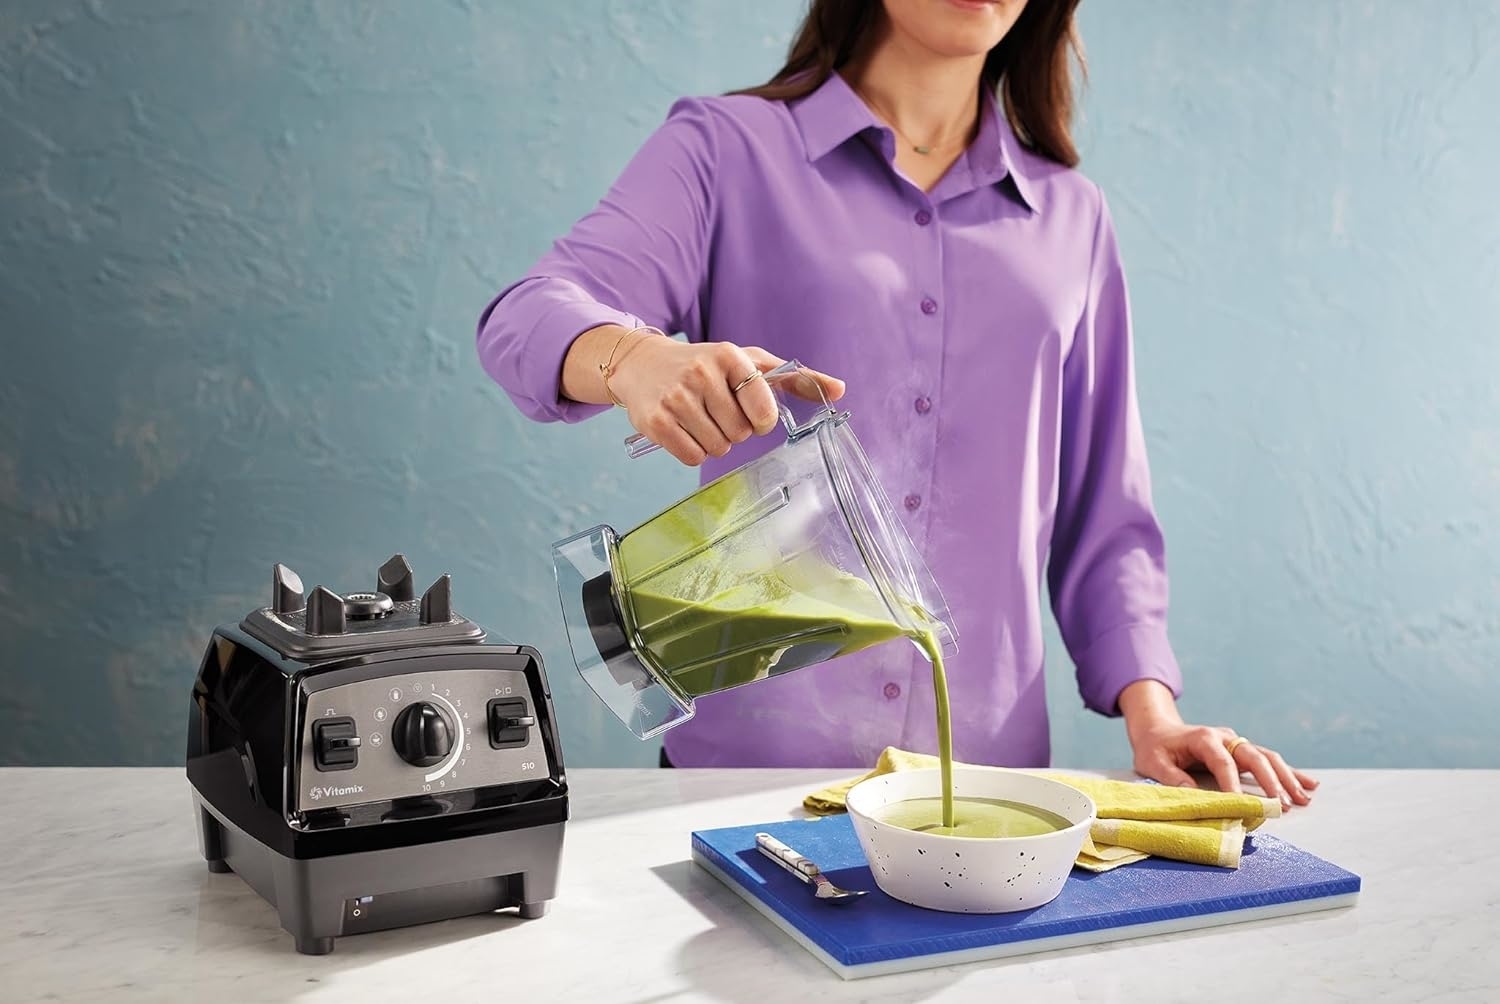 model pouring soup from a blender